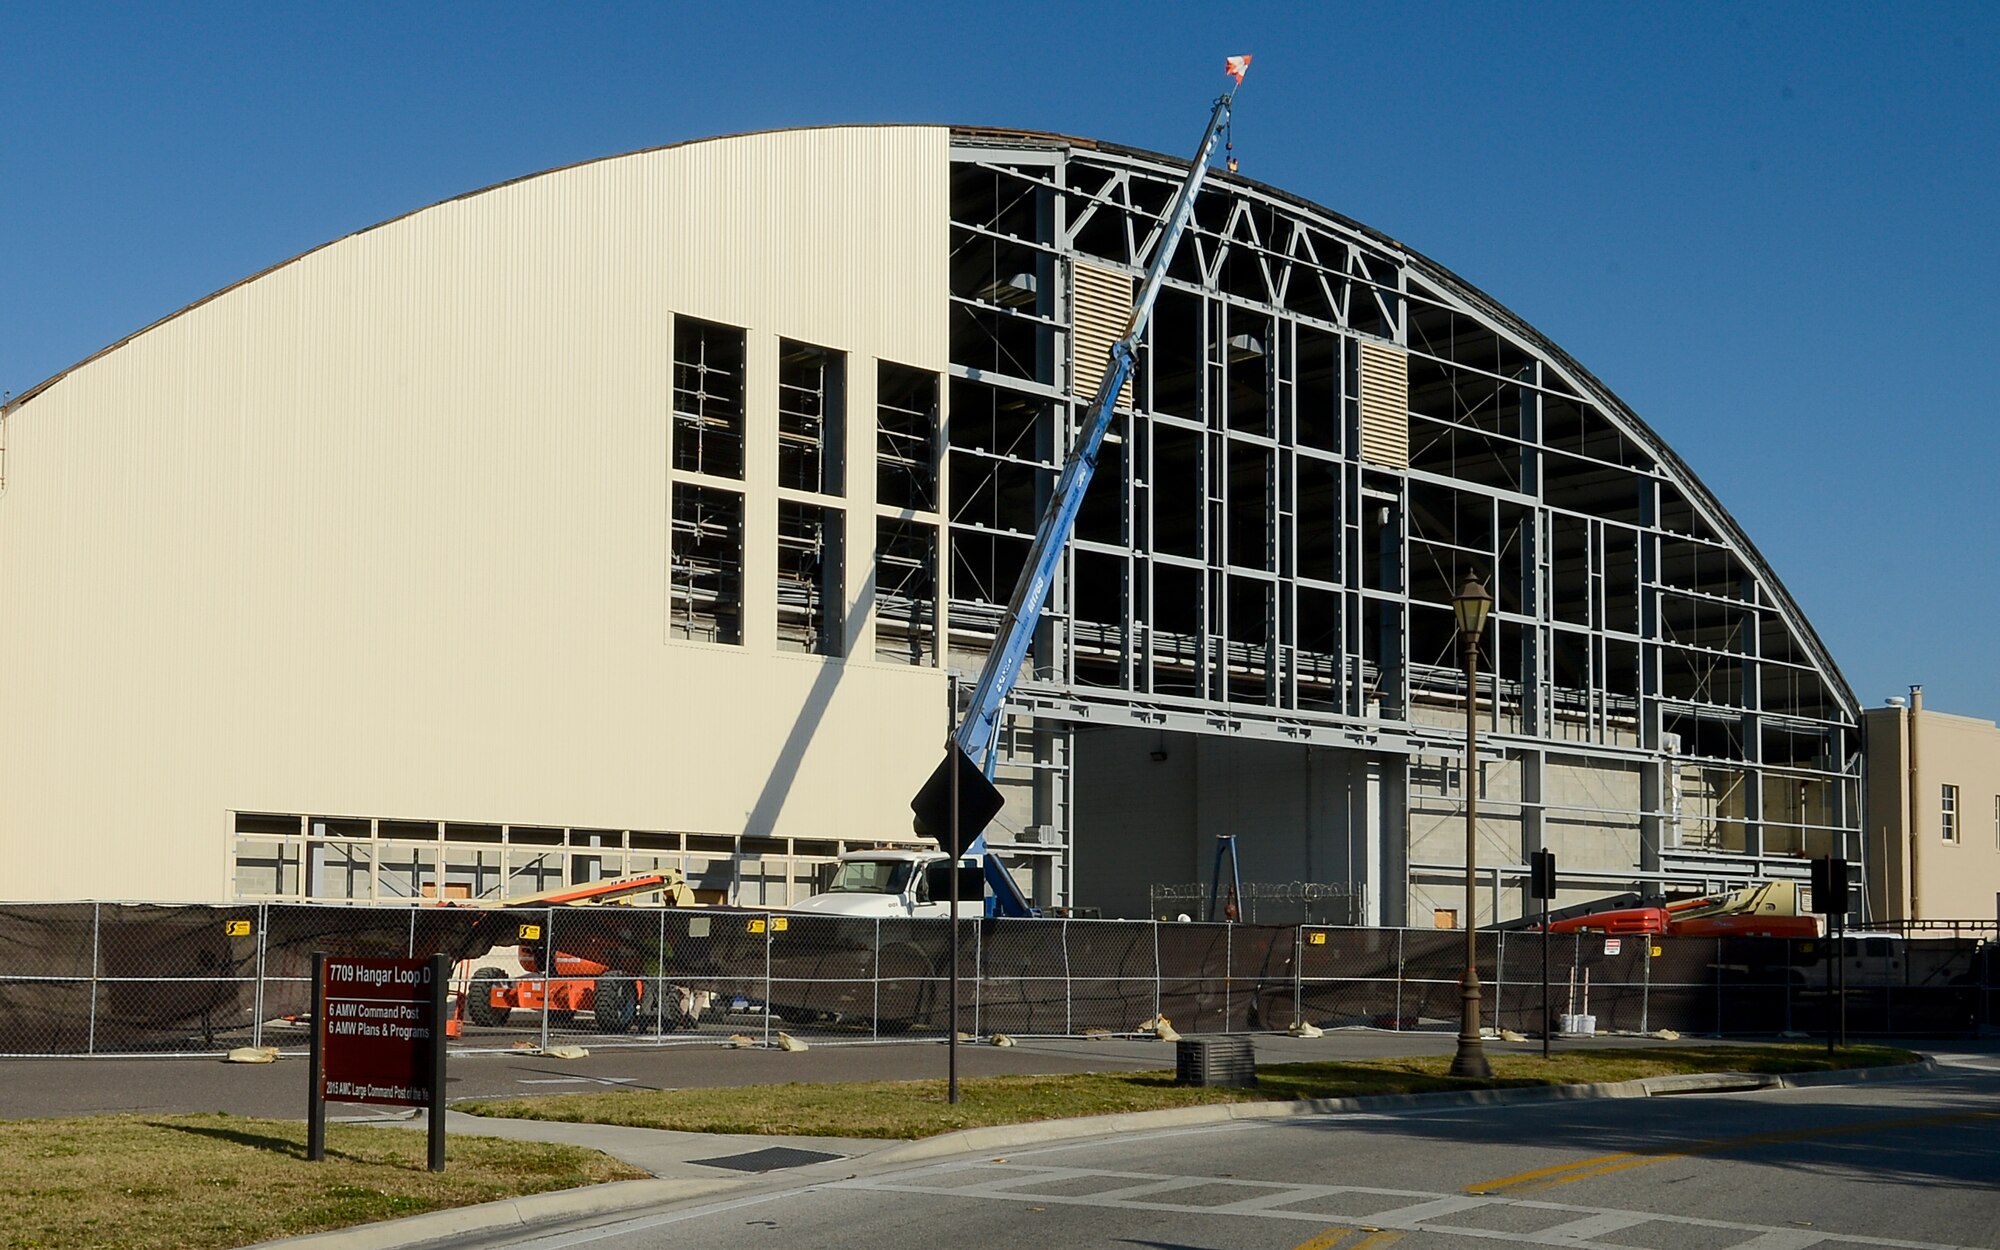 The 6th Civil Engineer Squadron reconstructs Hangar 2 to extend its lifespan Dec. 2, 2016, at MacDill Air Force Base, Fla. Reconstruction began Aug. 8, 2016, and is scheduled for completion April 3, 2017. (U.S. Air Force photo by Senior Airman Jenay Randolph)